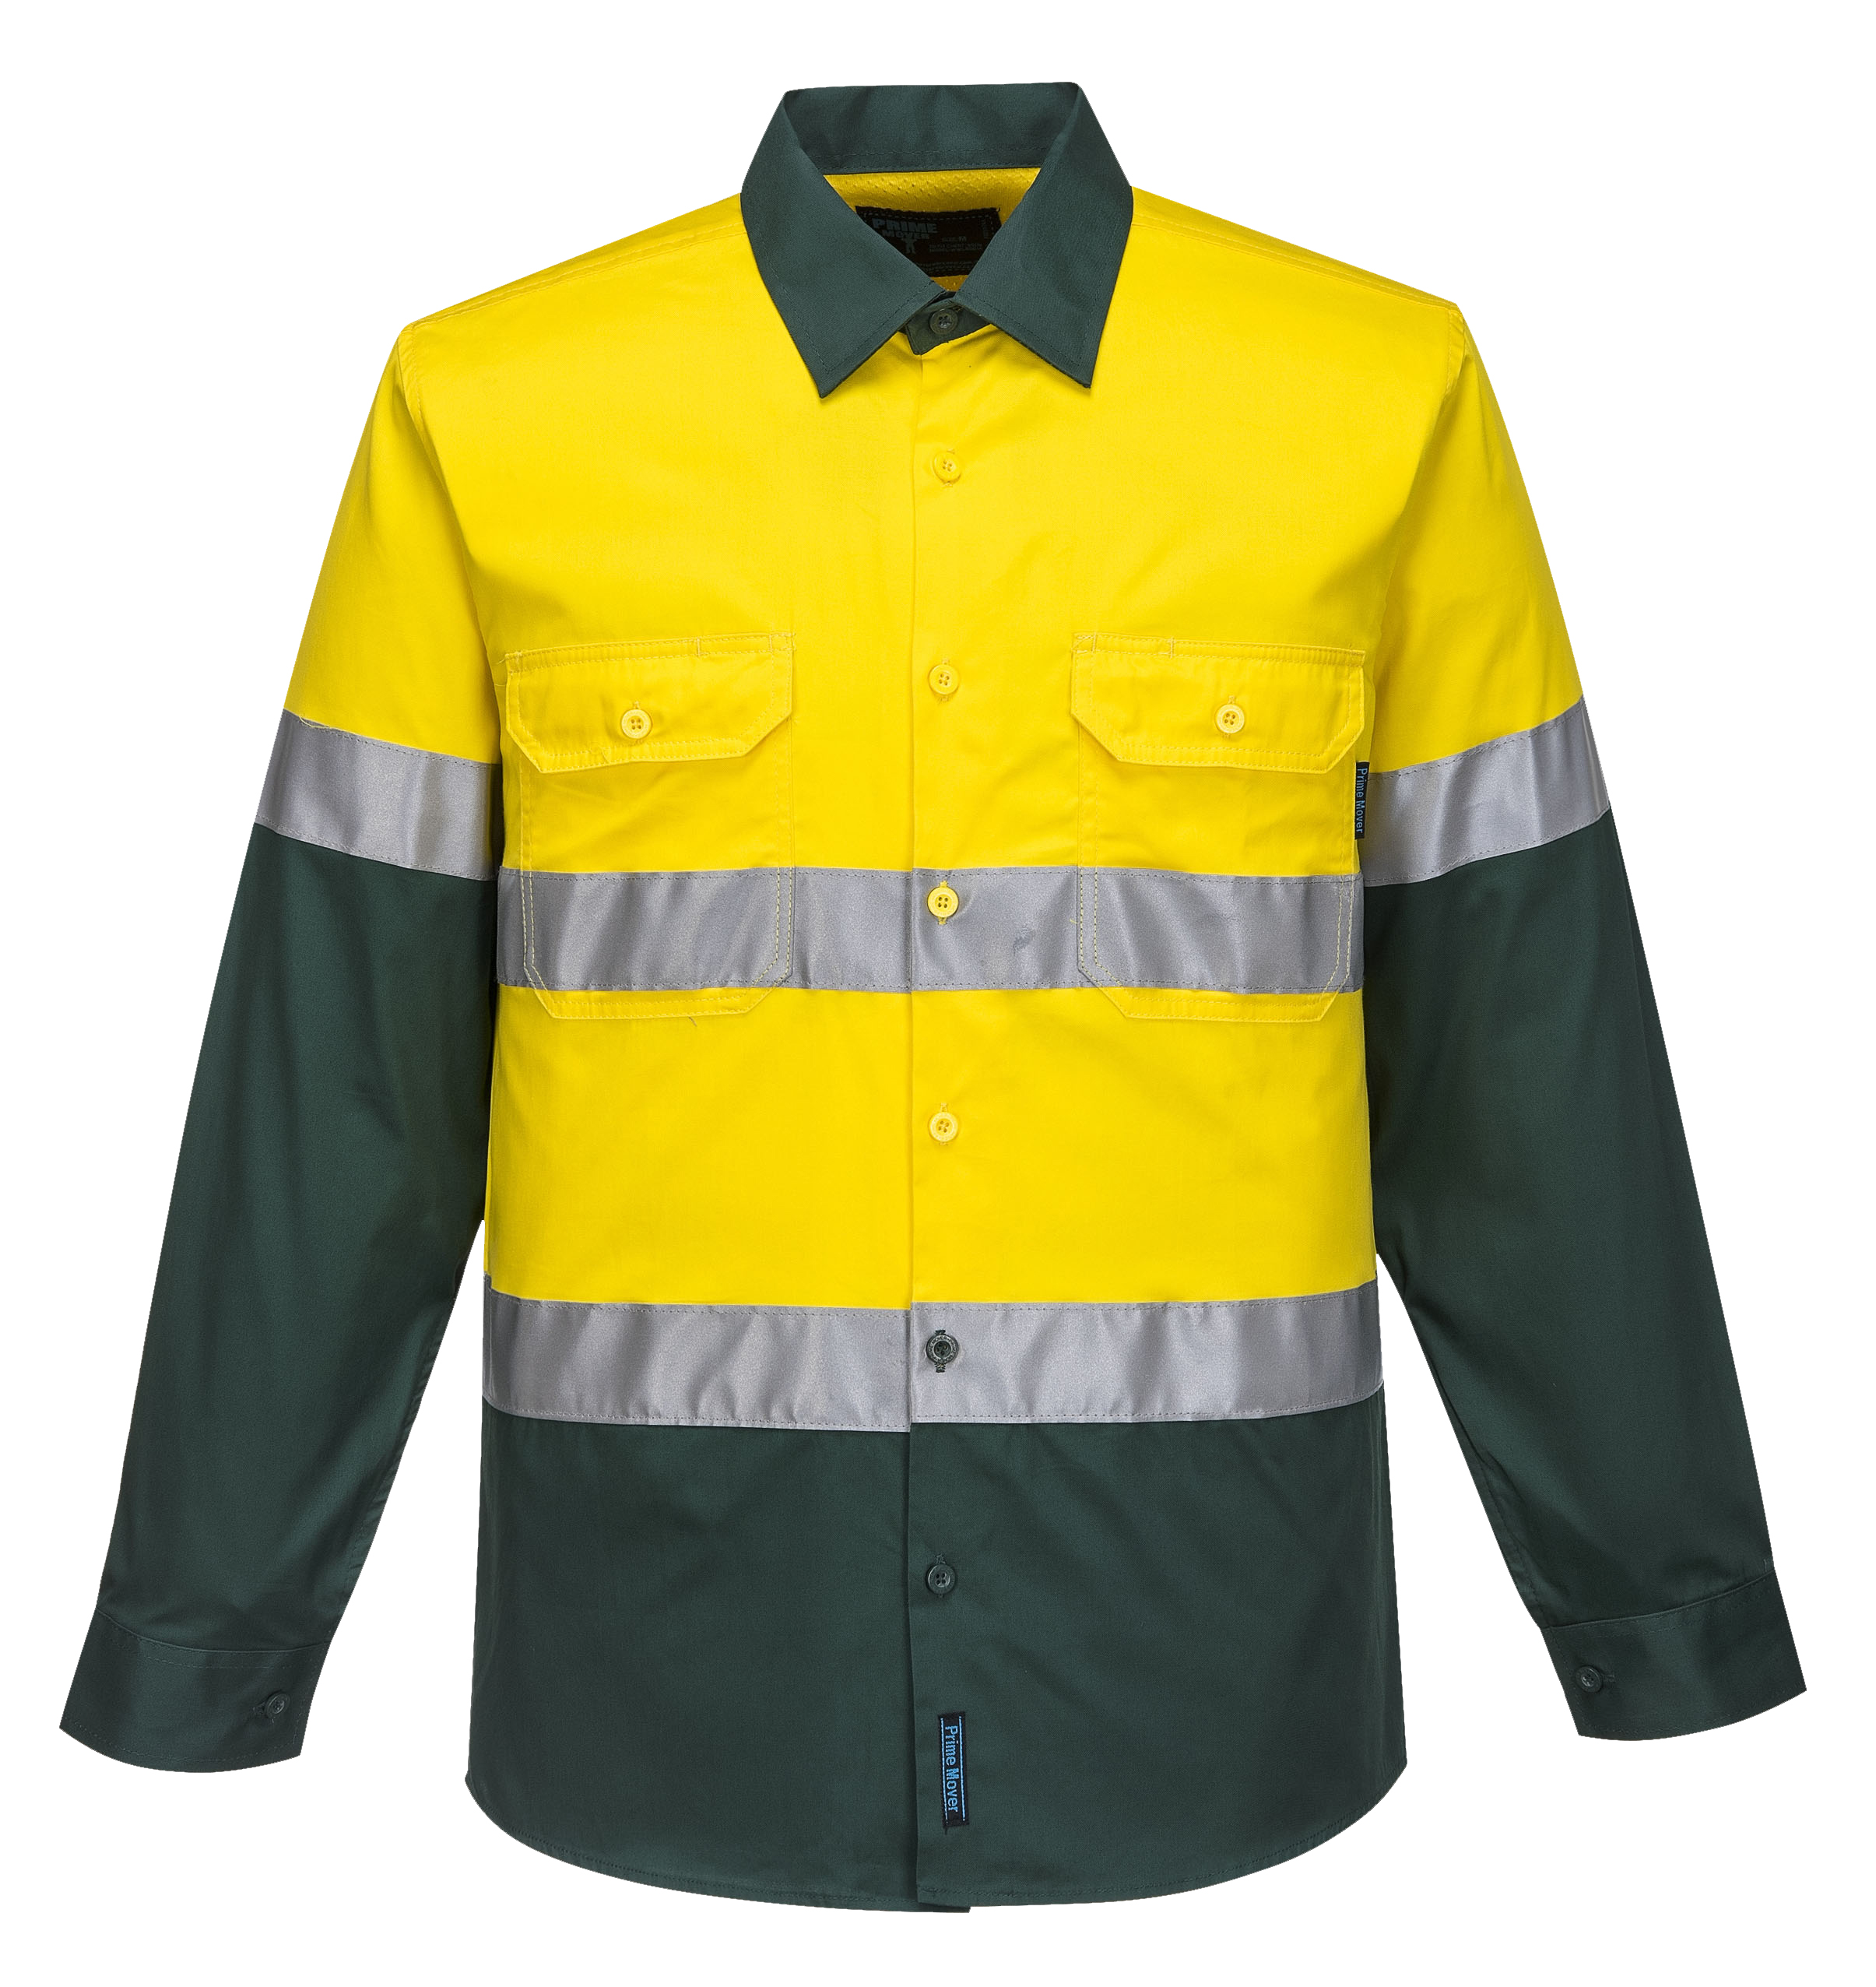 MA801 - Hi-Vis Two Tone Cotton Lightweight Long Sleeve Shirt with Tape GRE1